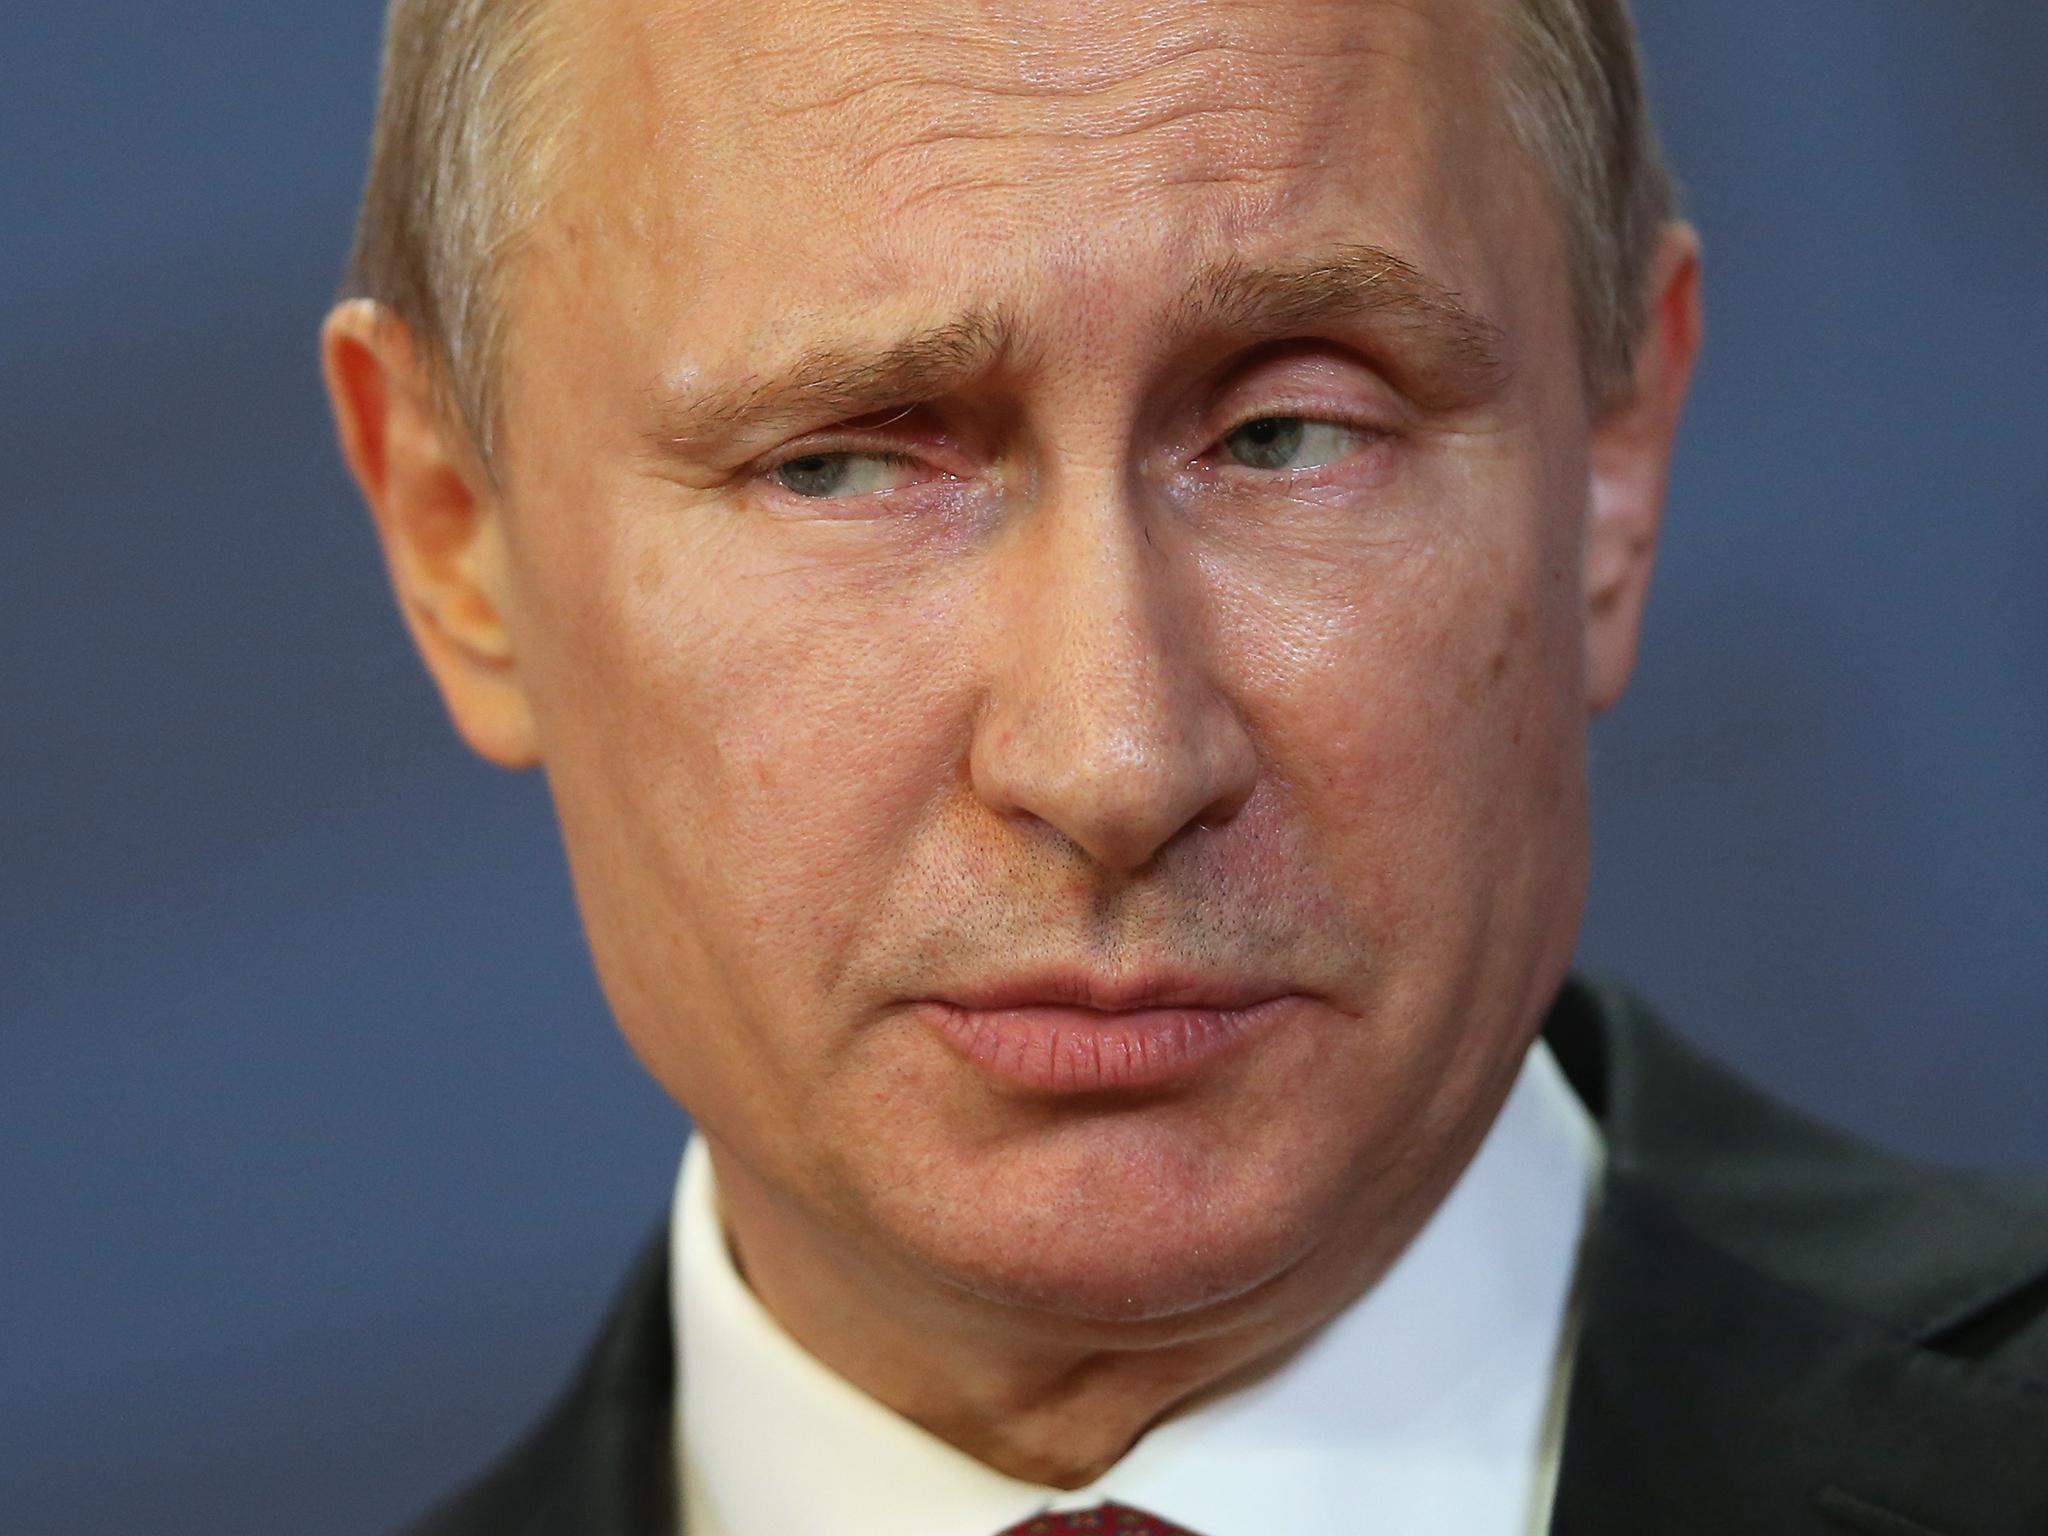 The West exaggerates Putin’s power and authority, with a tsar analogy that does not fit